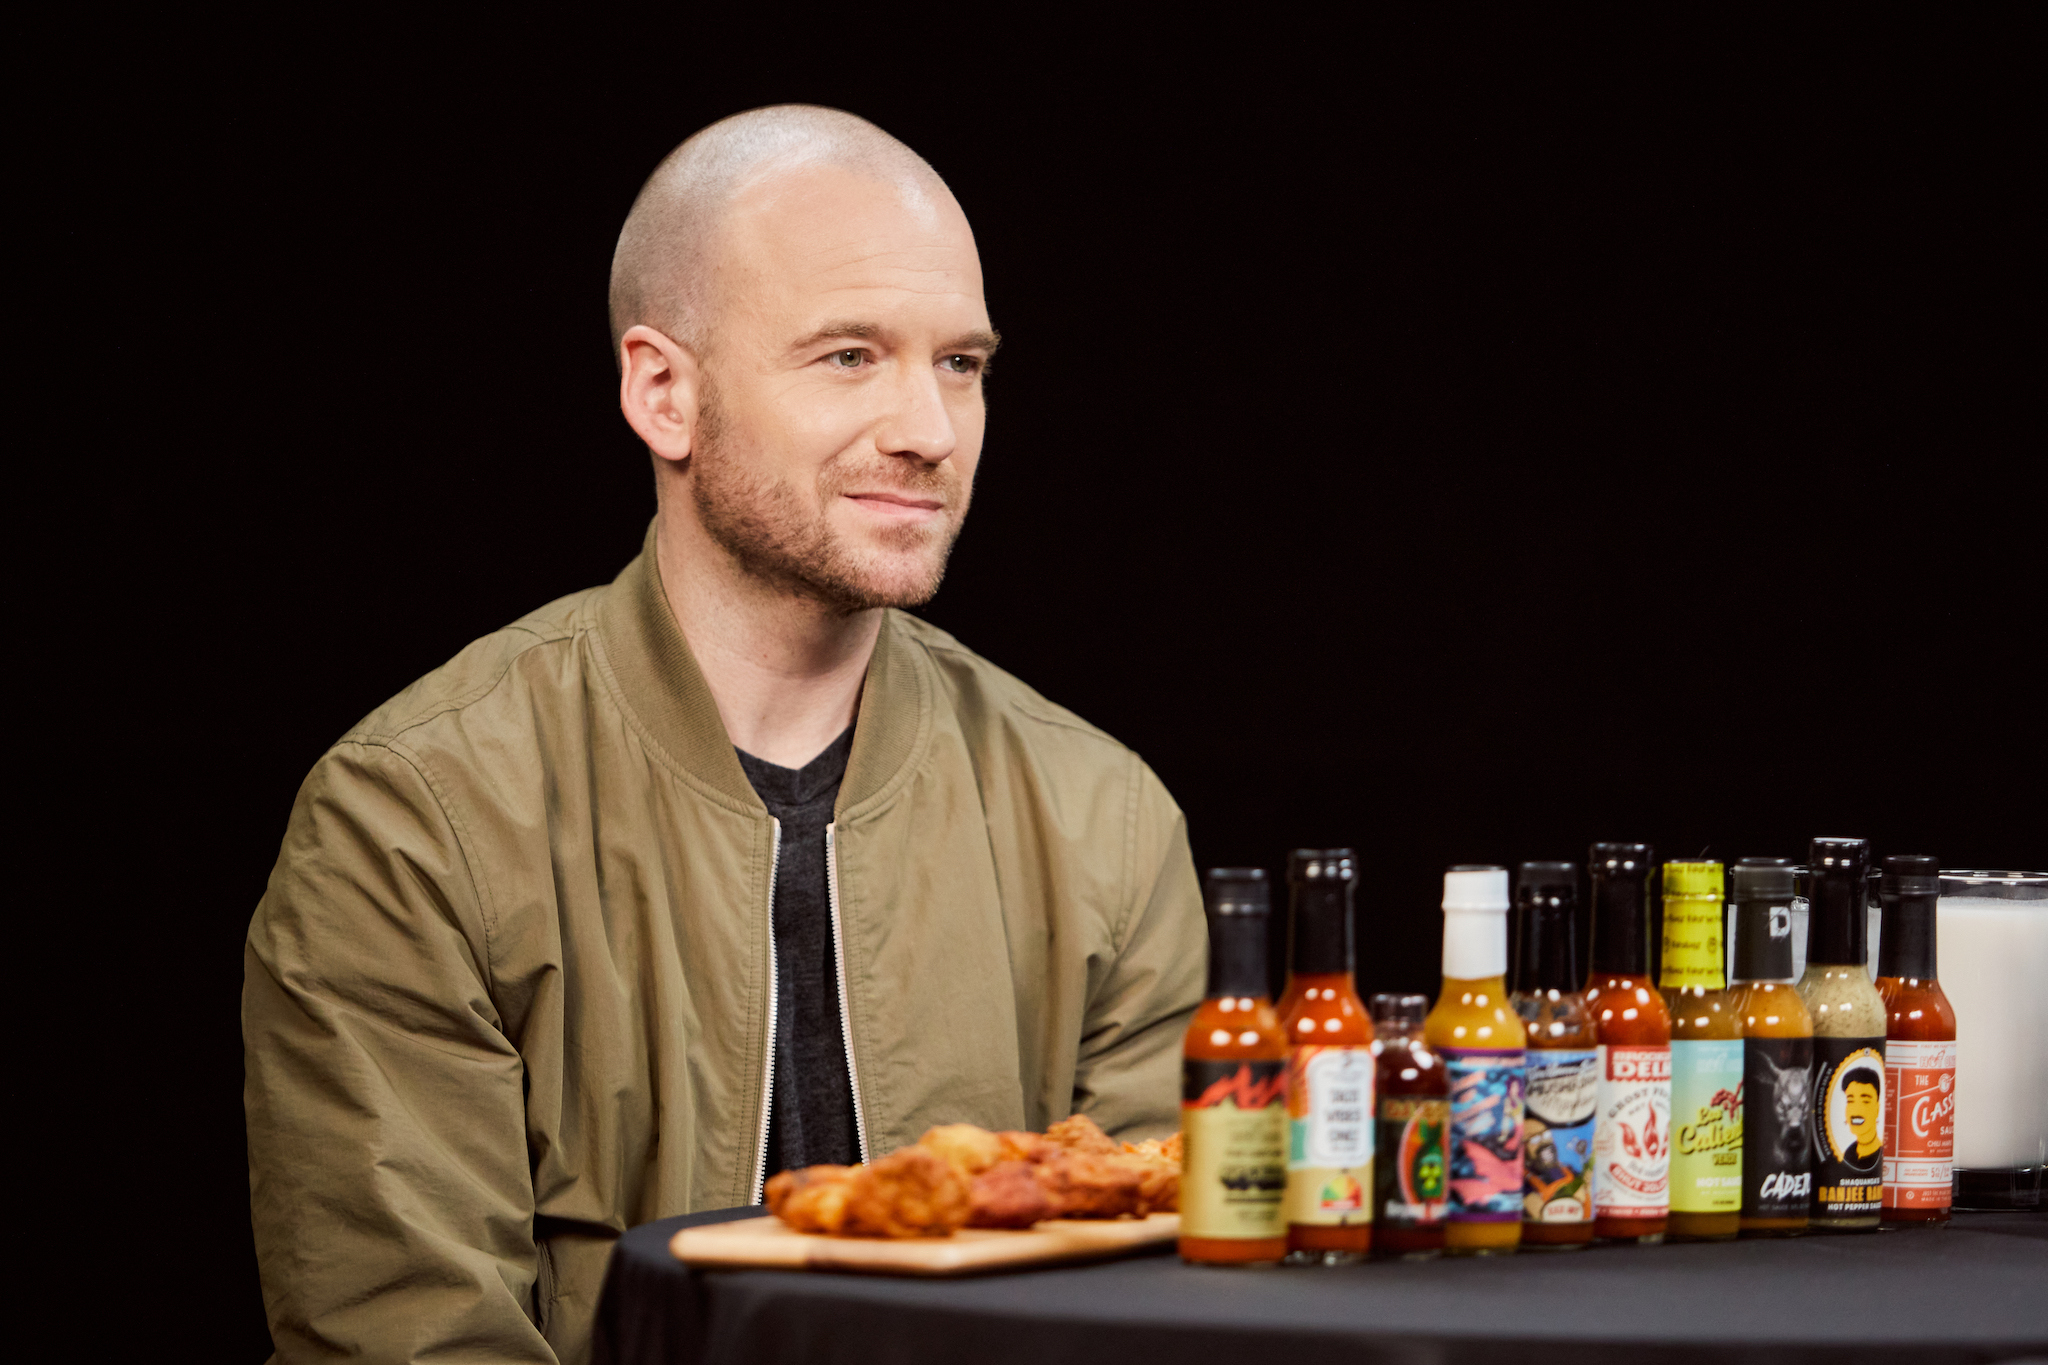 Exclusive: Hear from 'Hot Ones' star Sean Evans at this spicy conversation in NYC